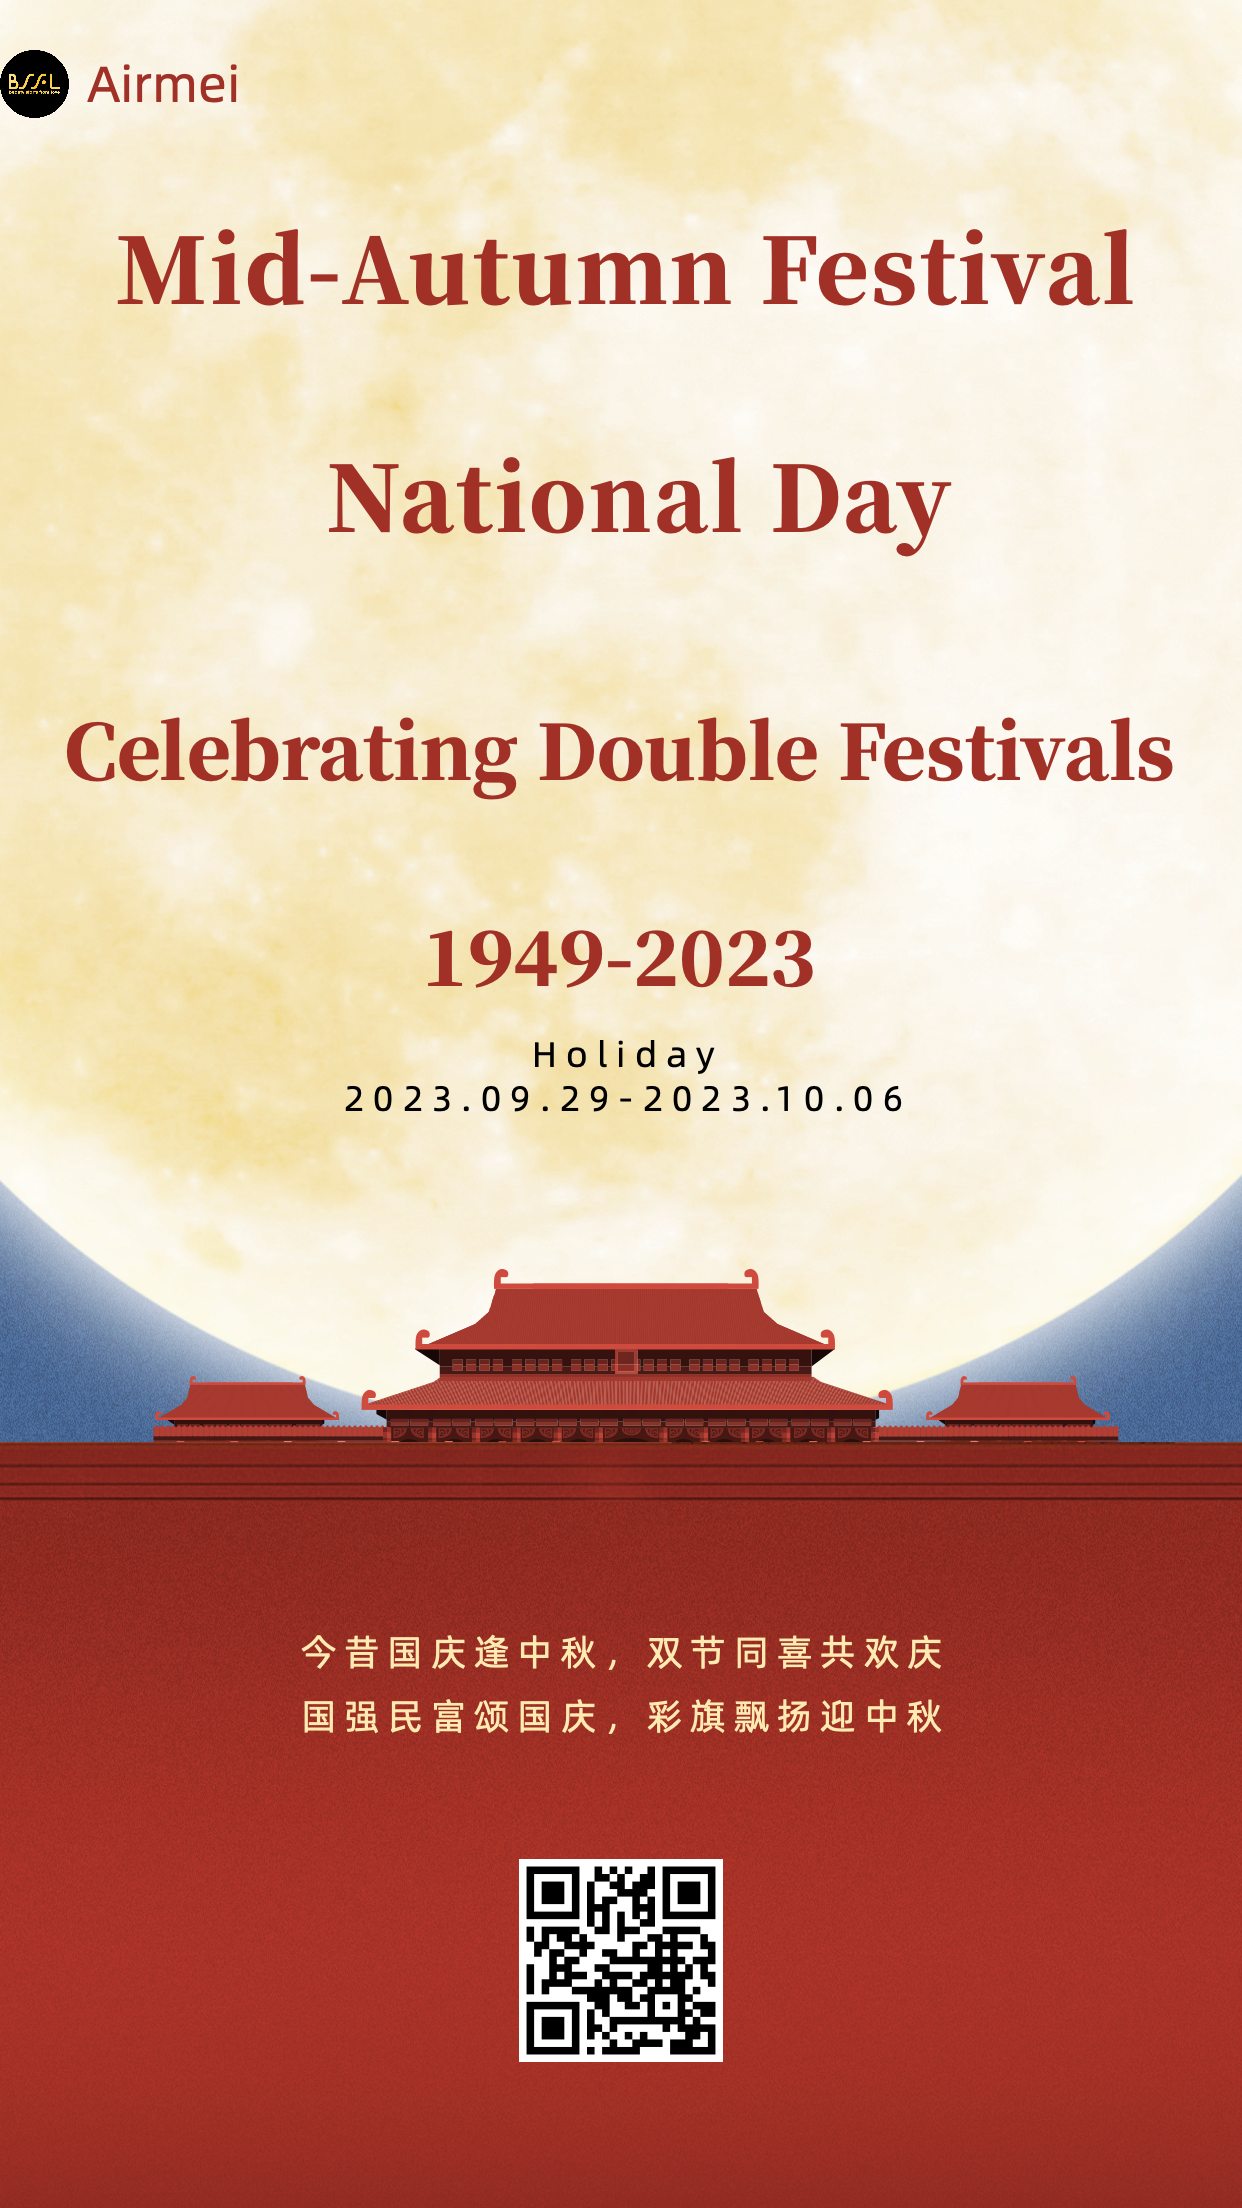 Mid-Autumn Festival National Day 